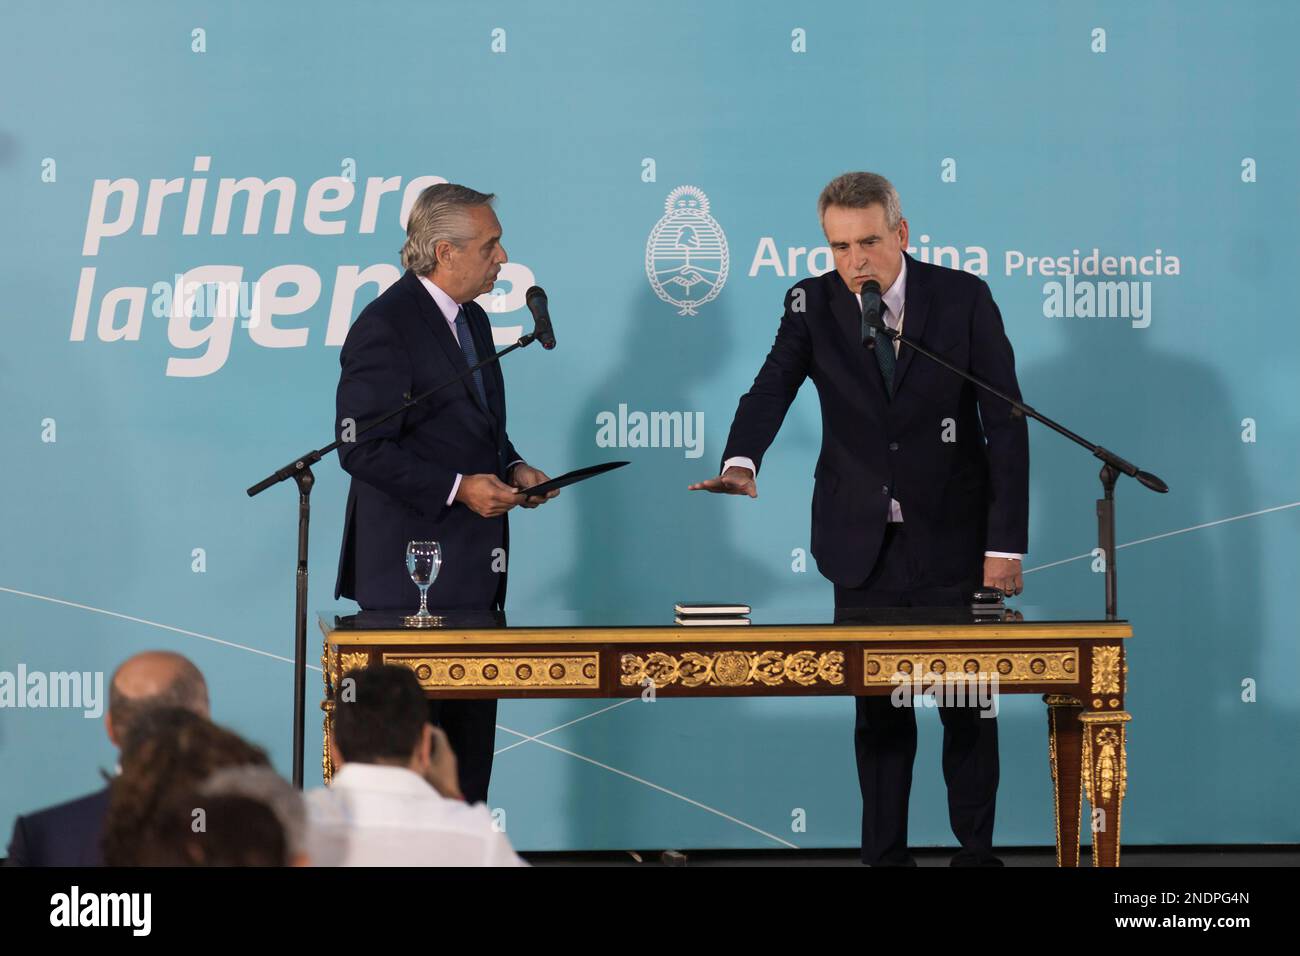 Buenos Aires, Argentina. 15th Feb, 2023. The President of the Nation Alberto Fernandez swore in the new Chief of Ministers of the Nation Agustín Rossi at the Government House. (Photo by Esteban Osorio/Pacific Press) Credit: Pacific Press Media Production Corp./Alamy Live News Stock Photo